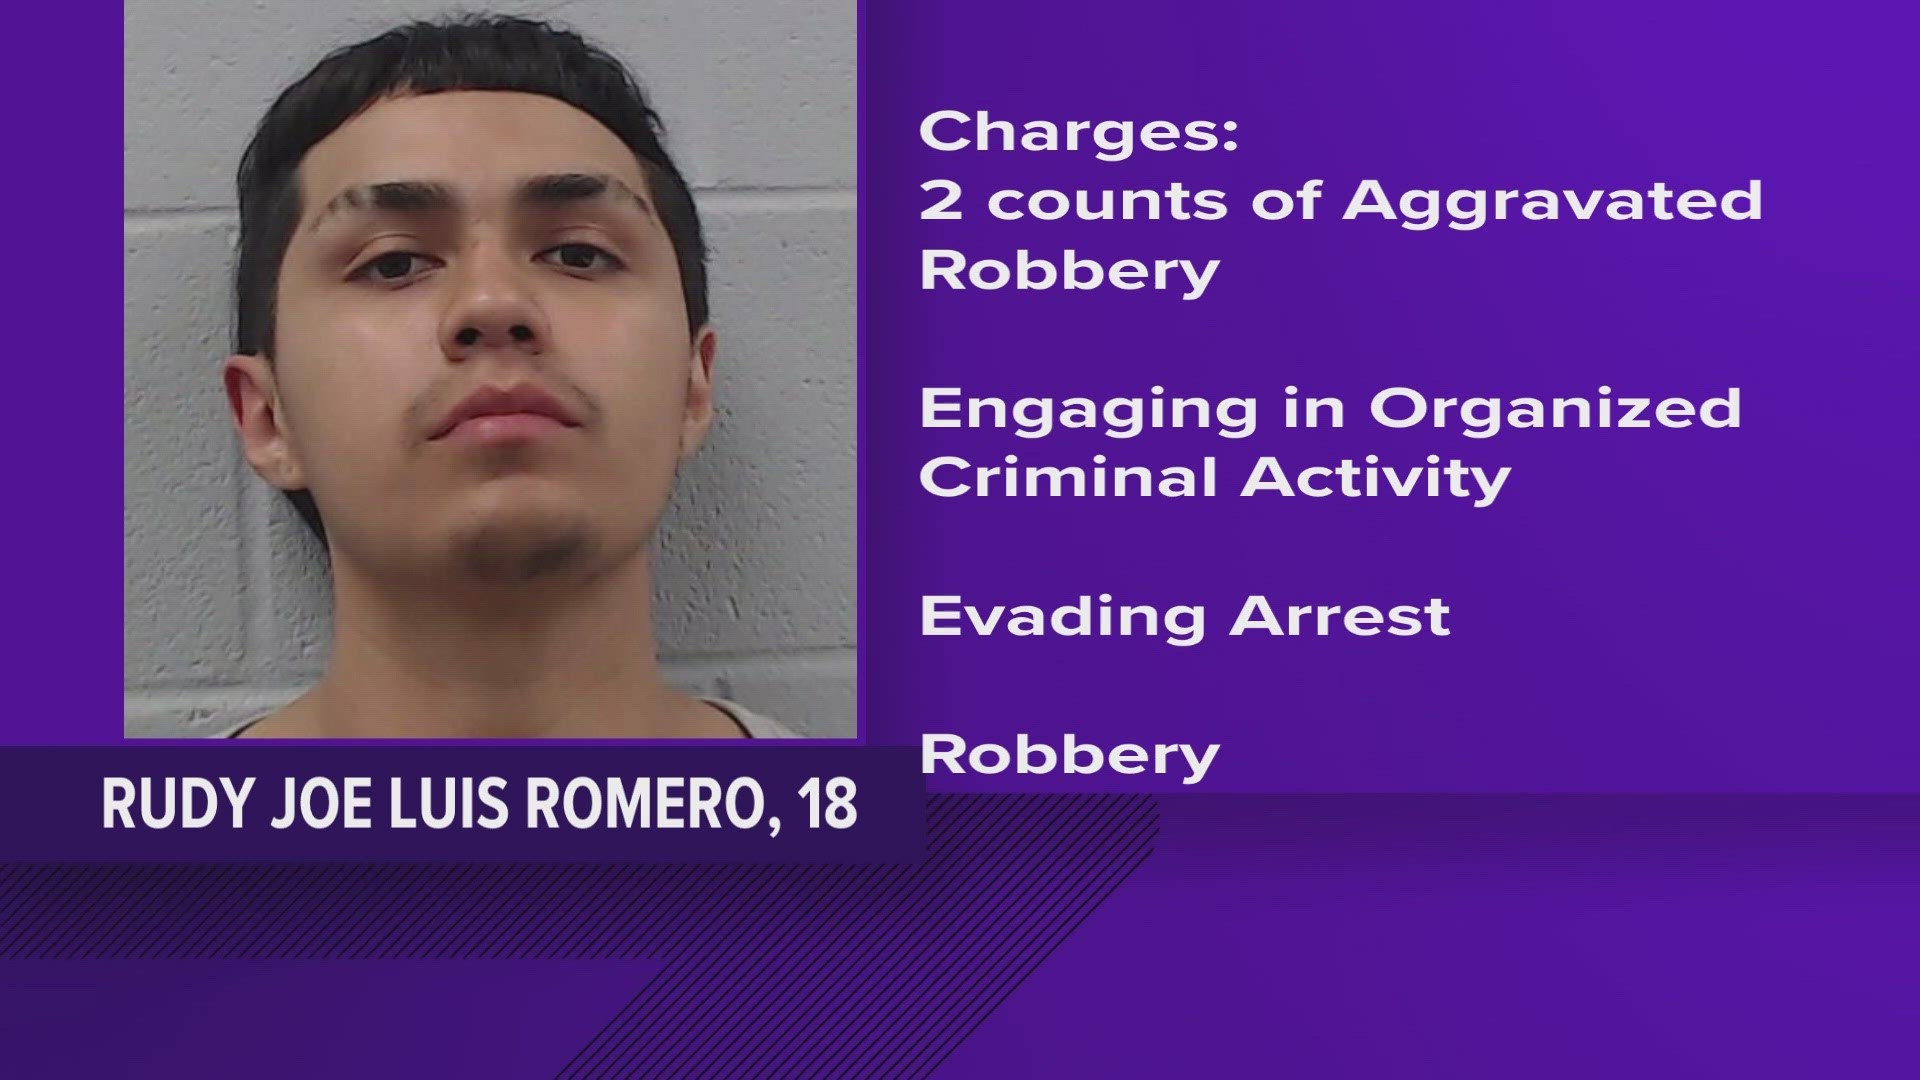 Rudy Joe Luis Romero is facing a number of felony charges including aggravated robbery and engaging in organized criminal activity.